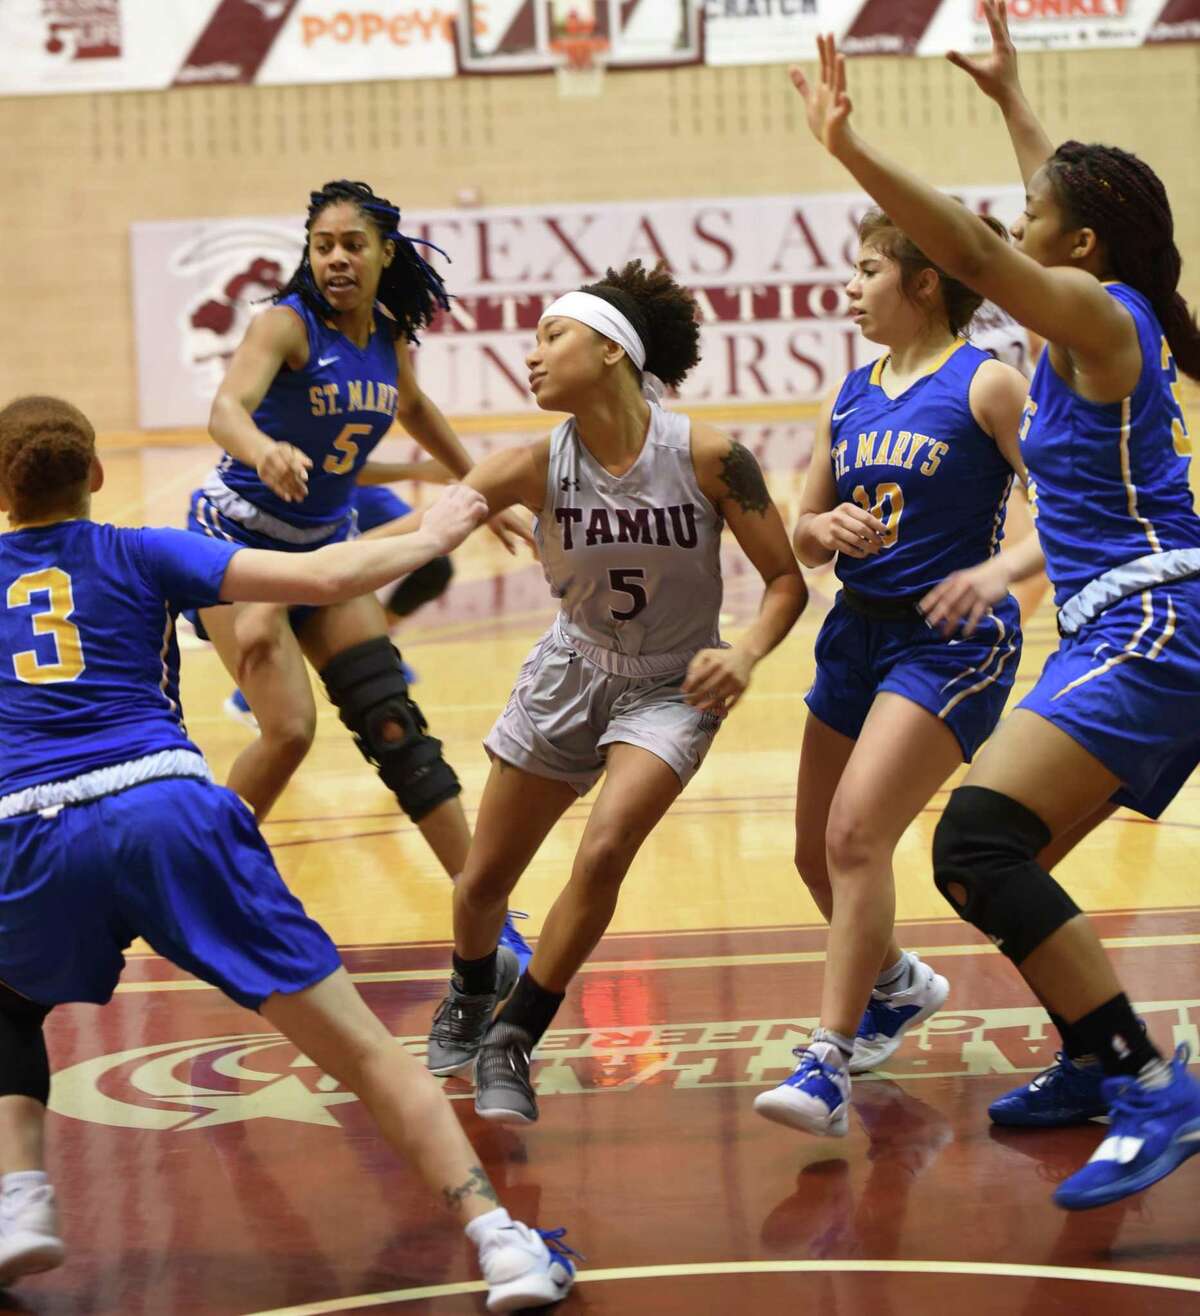 Tacoya Allen and the Dustdevils lost 69-58 on Saturday to rival St. Mary’s as they finished the program’s first winless regular season at 0-26. They have an automatic bid to next week’s Heartland Conference tournament in Tulsa, Okla. where they will take on league champion No. 25 Lubbock Christian.